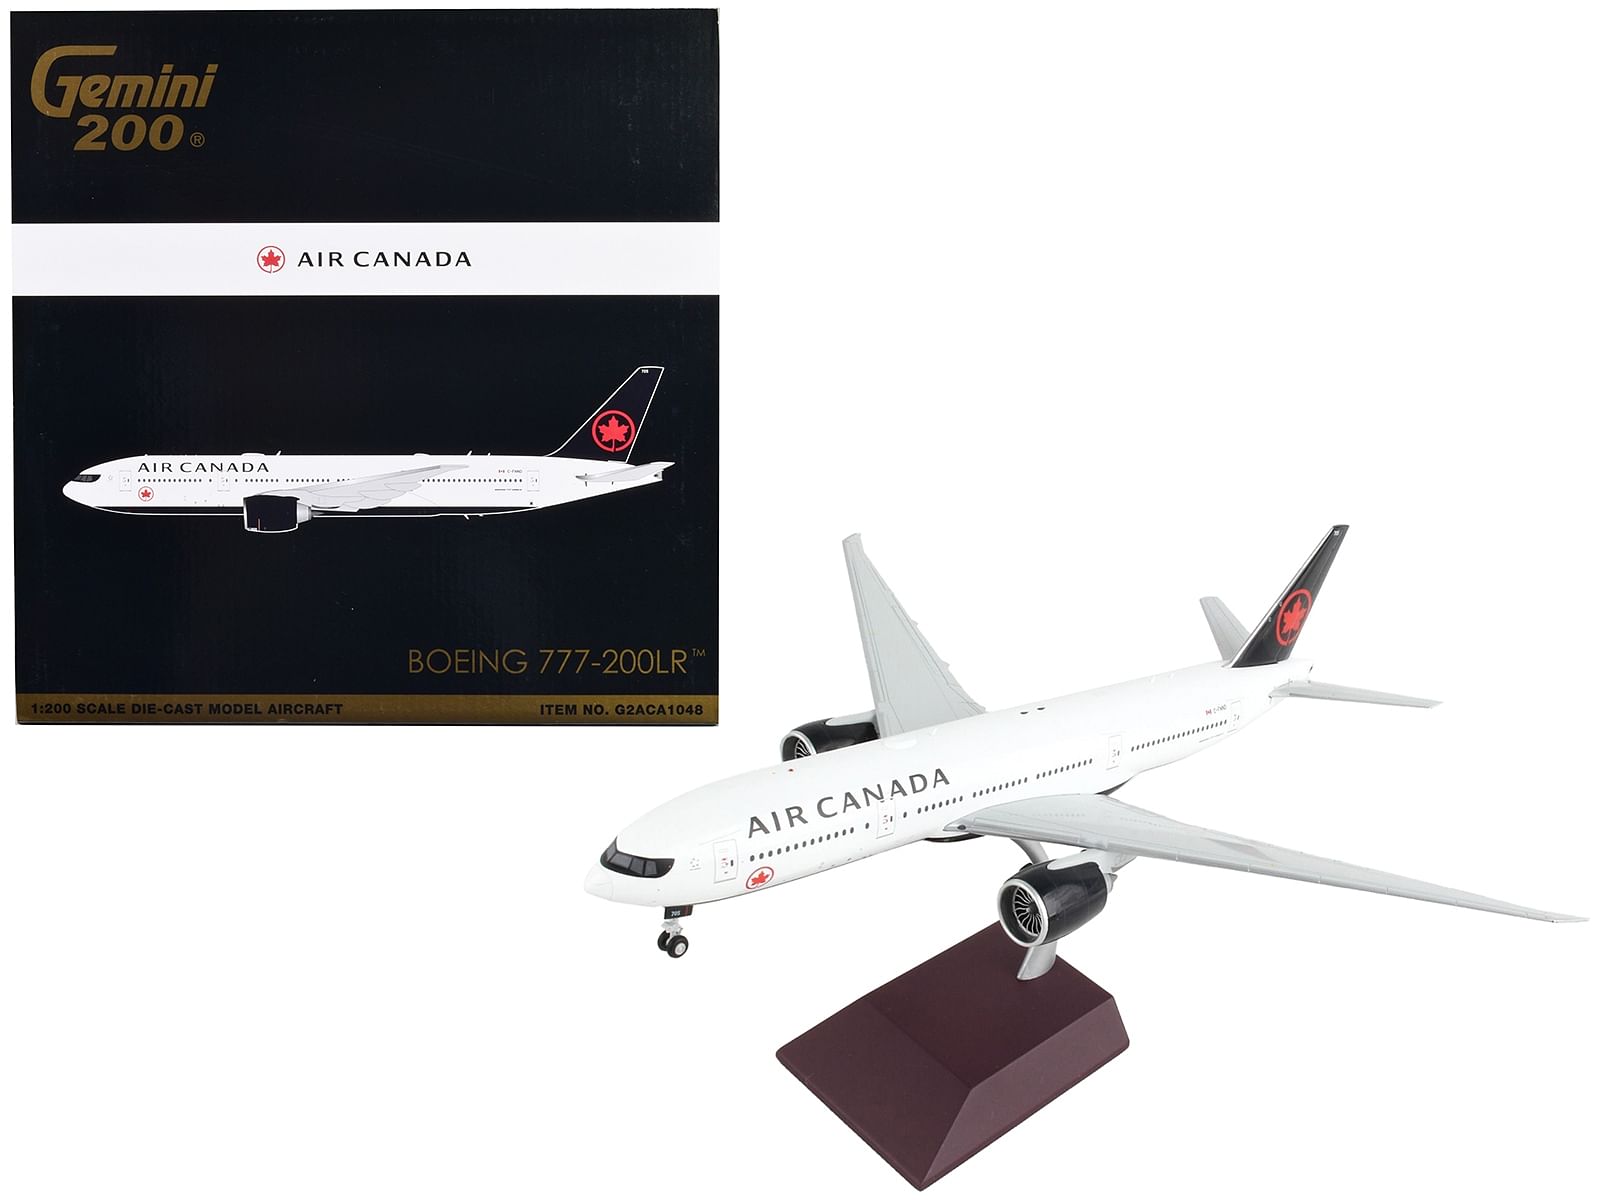 Boeing KC-135R Stratotanker Tanker Aircraft "Maine Air National Guard" United States Air Force "Gemini 200" Series 1/200 Diecast Model Airplane by GeminiJets